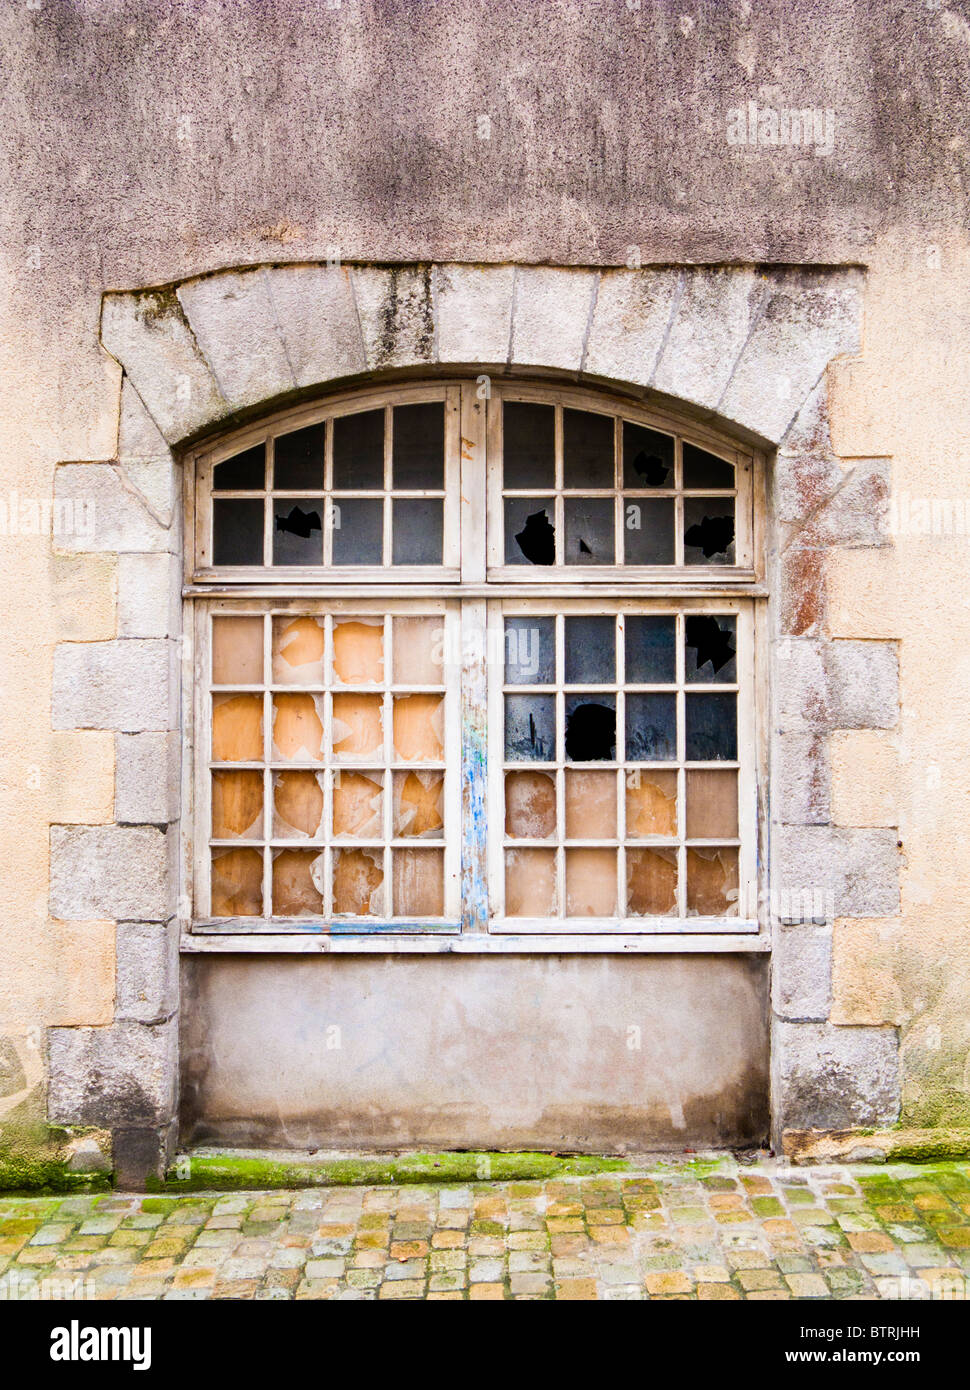 Arched window with broken panes of glass Stock Photo